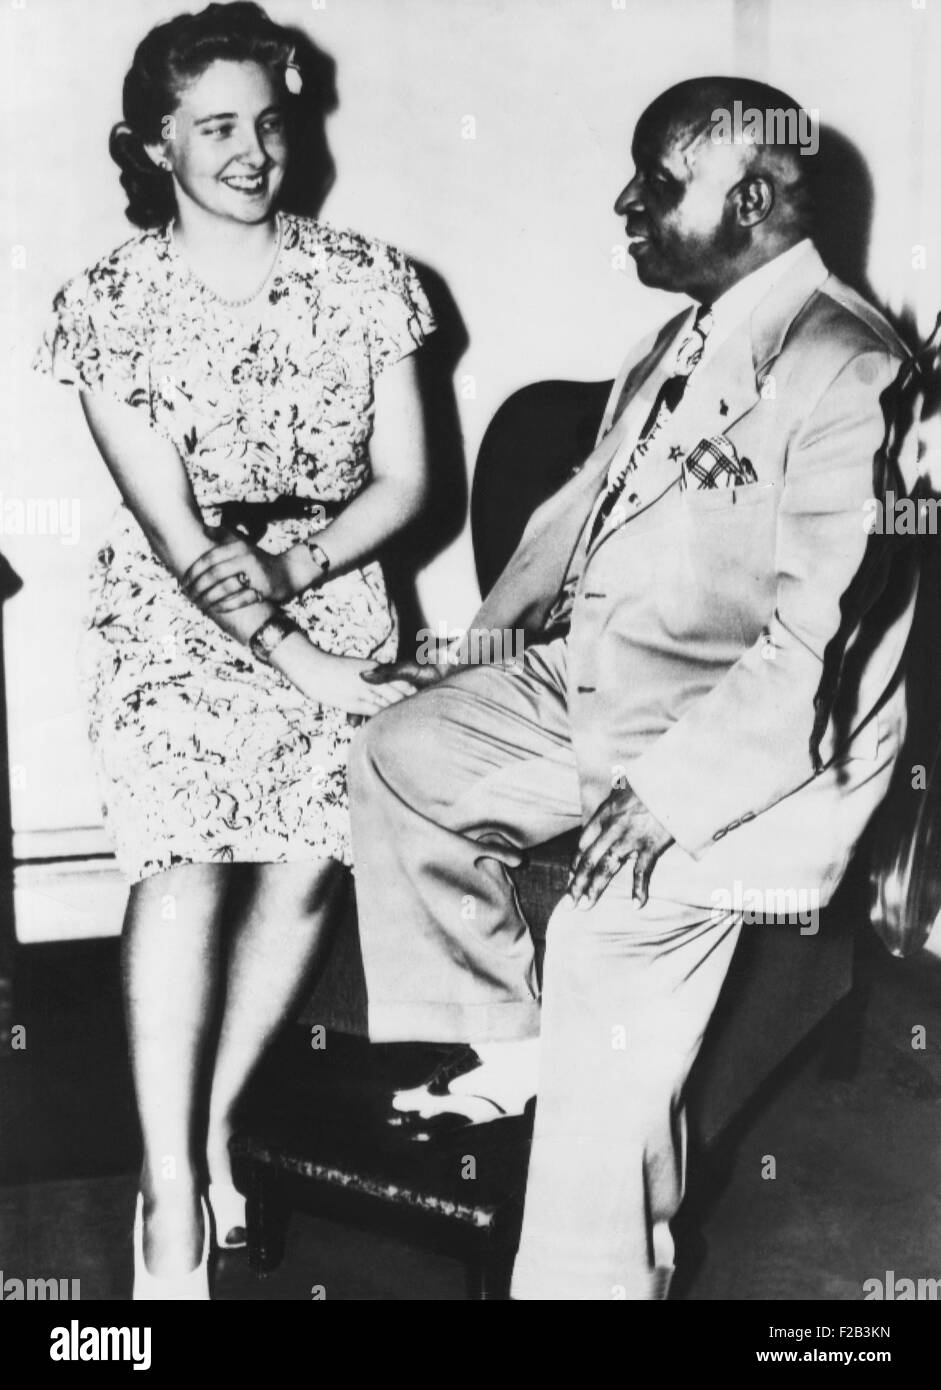 Father Divine, Cult leader and his 21 year old white bride, Edna Ritchings of Vancouver B.C. She agreed to the standard Peace Mission Movement celibate marriage. Newark New, Jersey, Aug. 8, 1946. Edna Ritchings, introduced as the reincarnation of Sister Penny, was also called Mother Divine, was the symbolic maintainer of the International Peace Mission movement into the 21st century. - (CSU 2015 5 80) Stock Photo